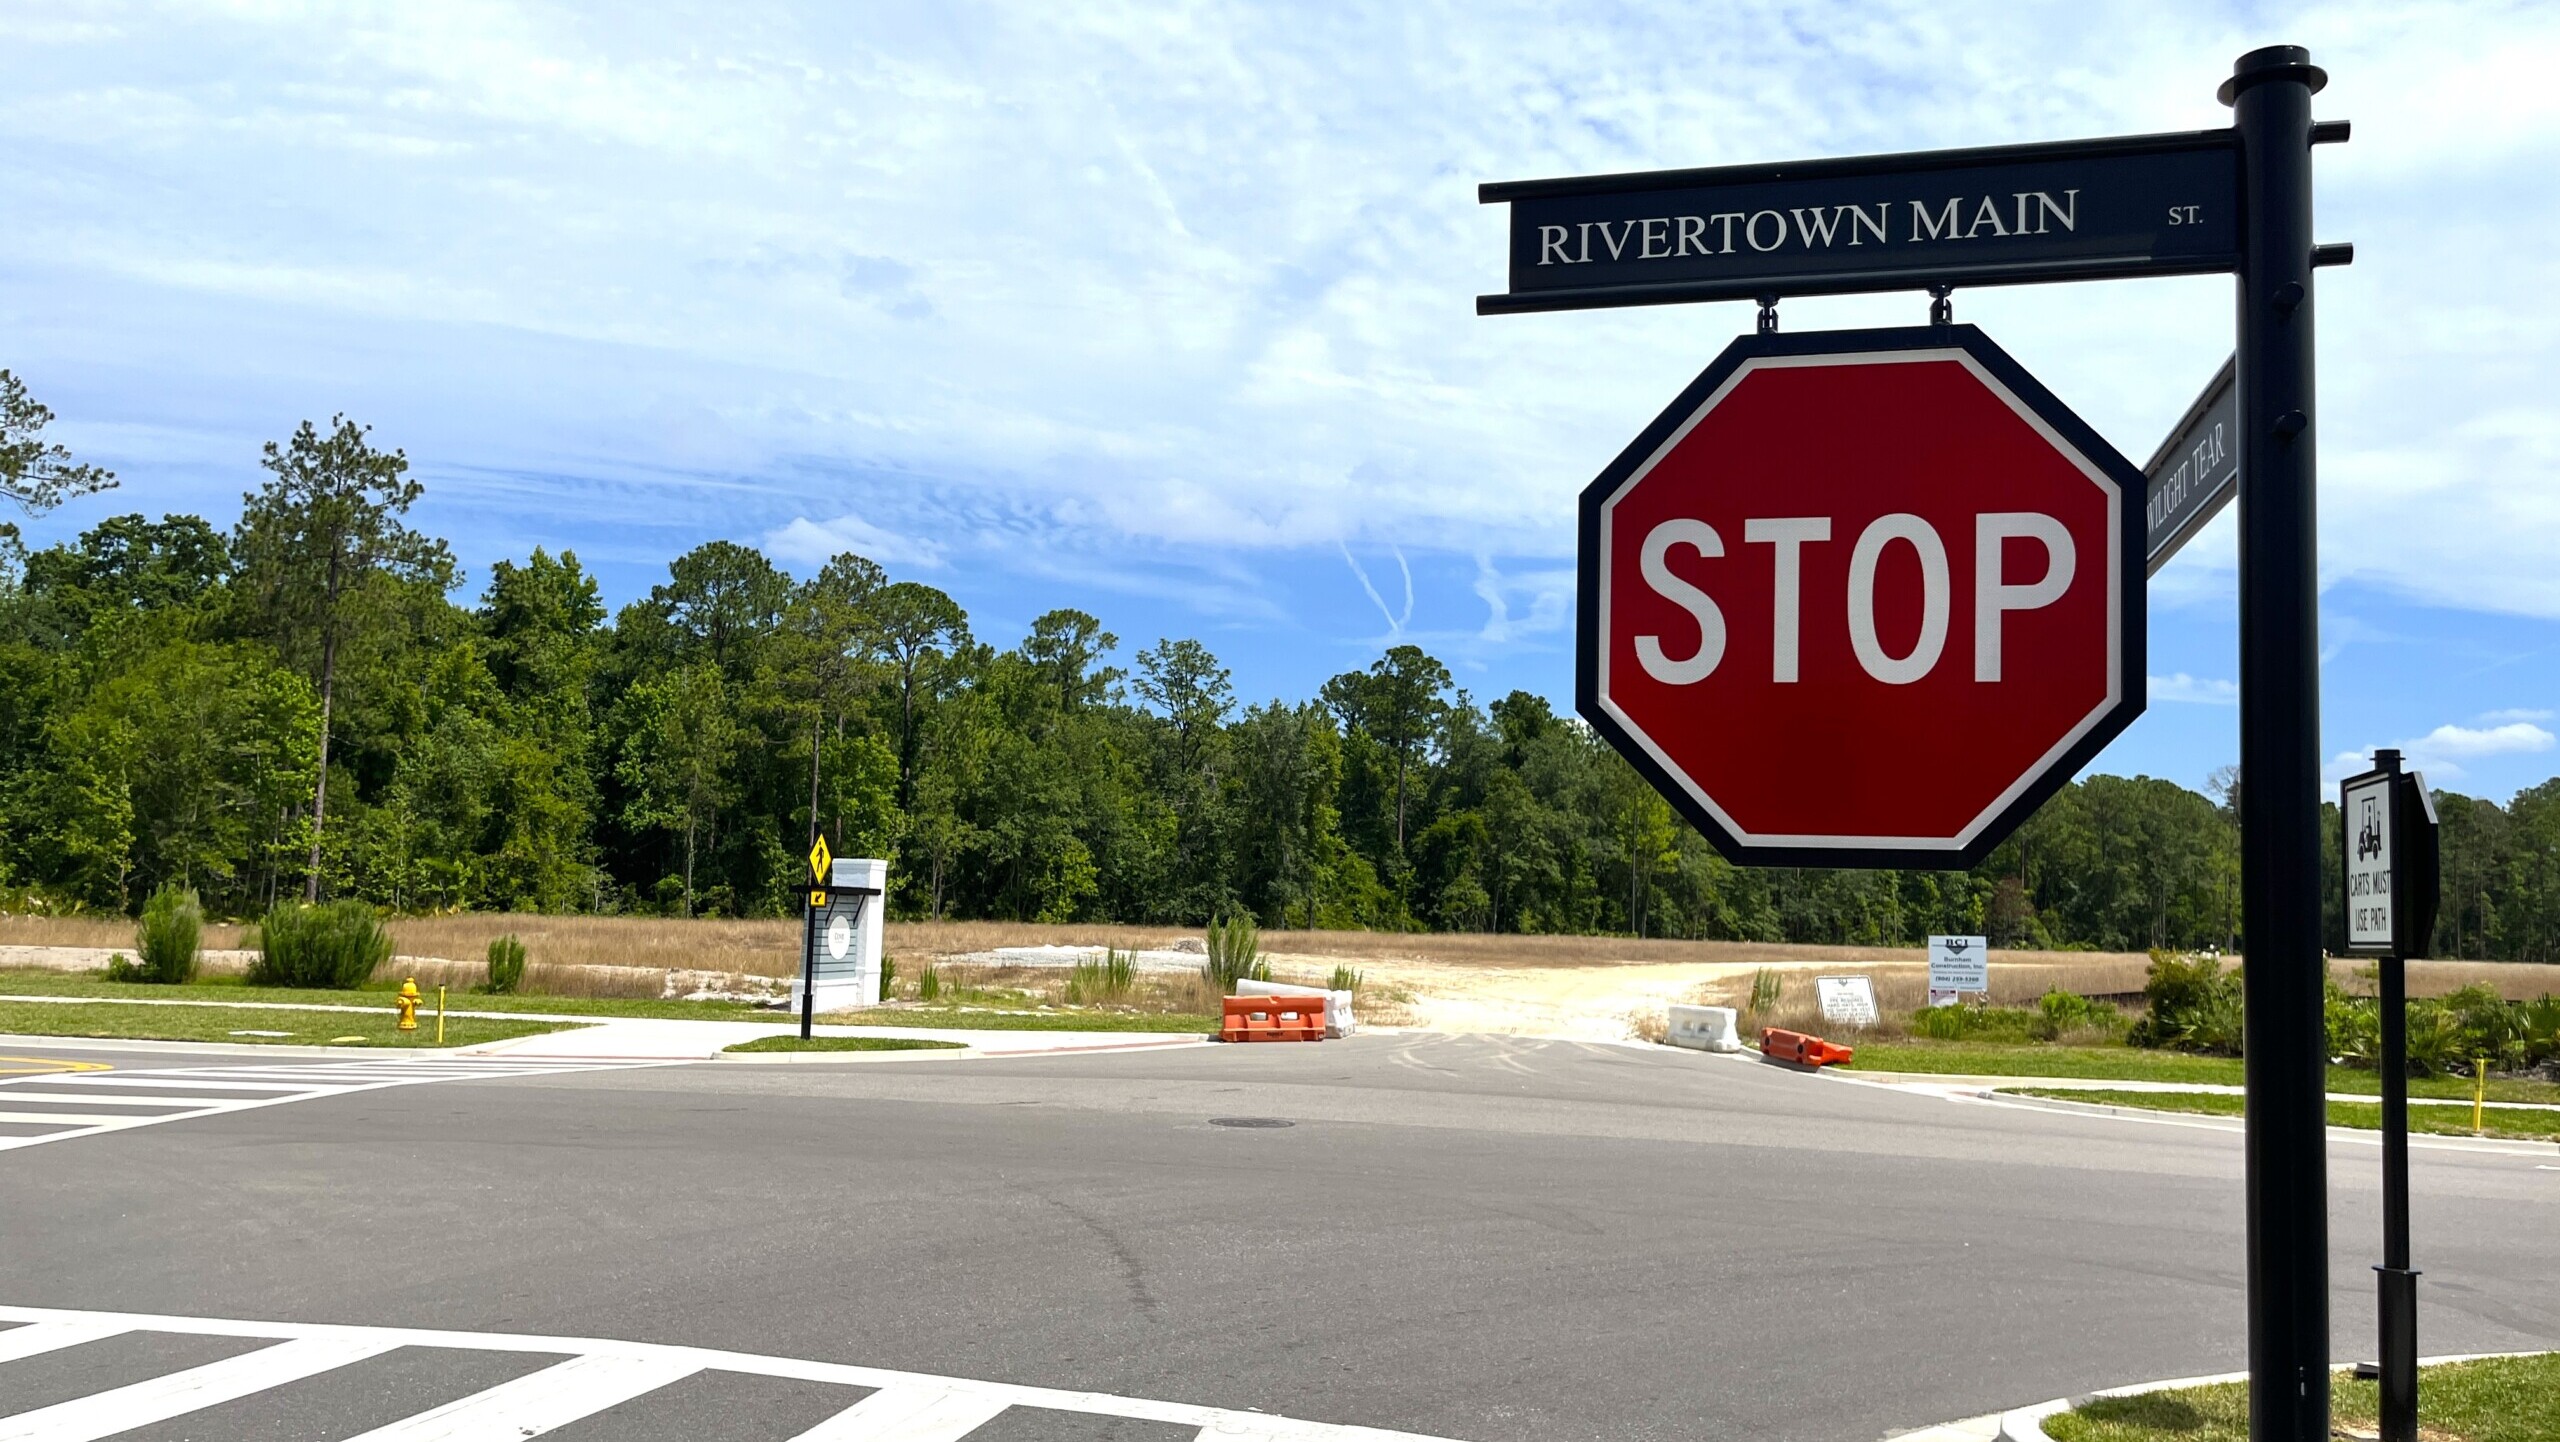 Rivertown Mainstreet is the main thoroughfare in much of the Rivertown development in St. Johns County, south of Fruit Cove. Hundreds of homes lie along the road, as well as a planned K-8 school. | Noah Hertz, Jacksonville Today.